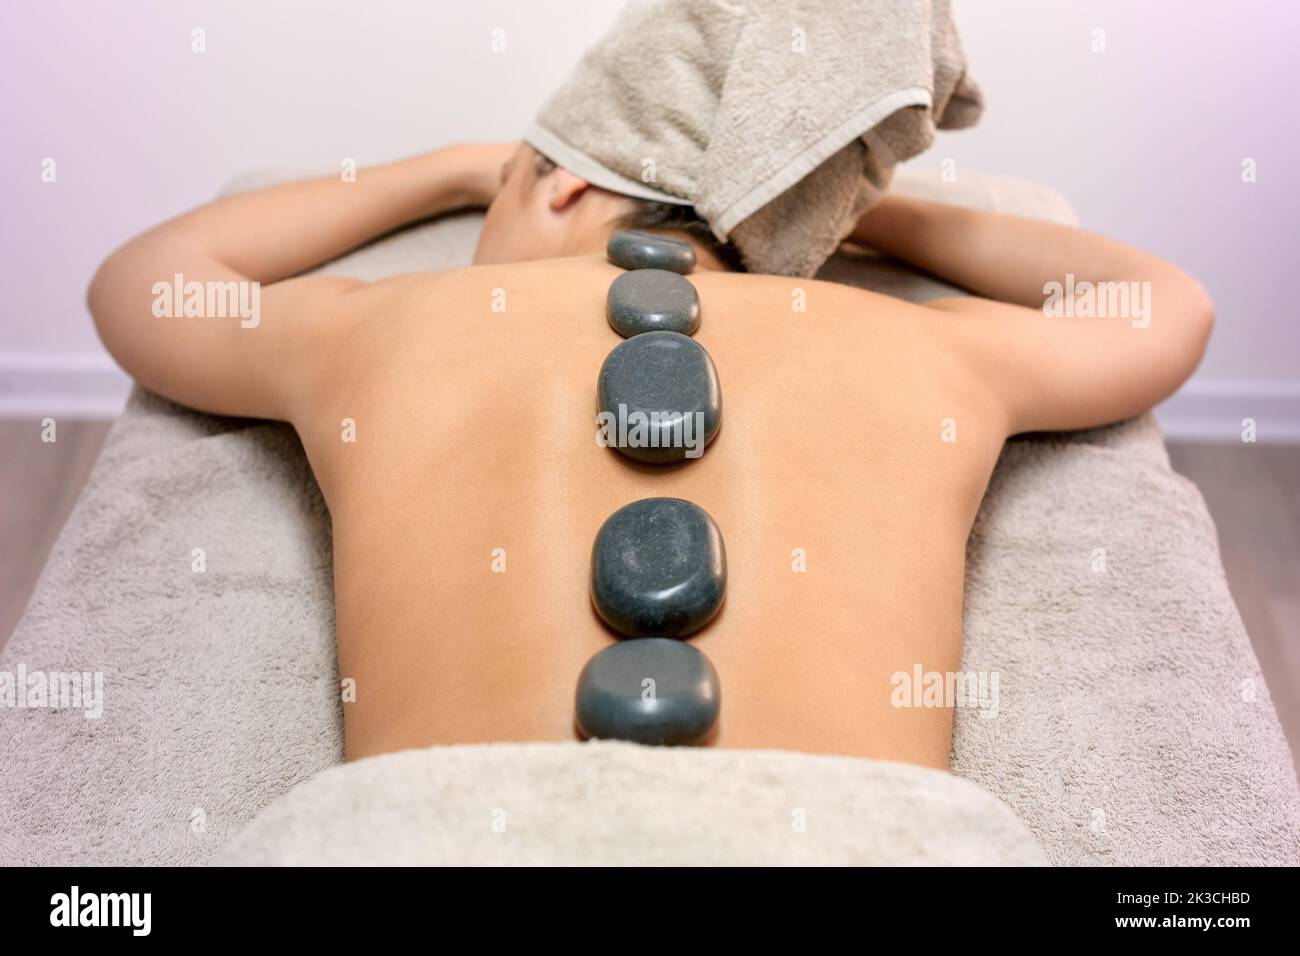 High angle of unrecognizable topless female with hot stones on back lying on table during massage session in spa salon Stock Photo